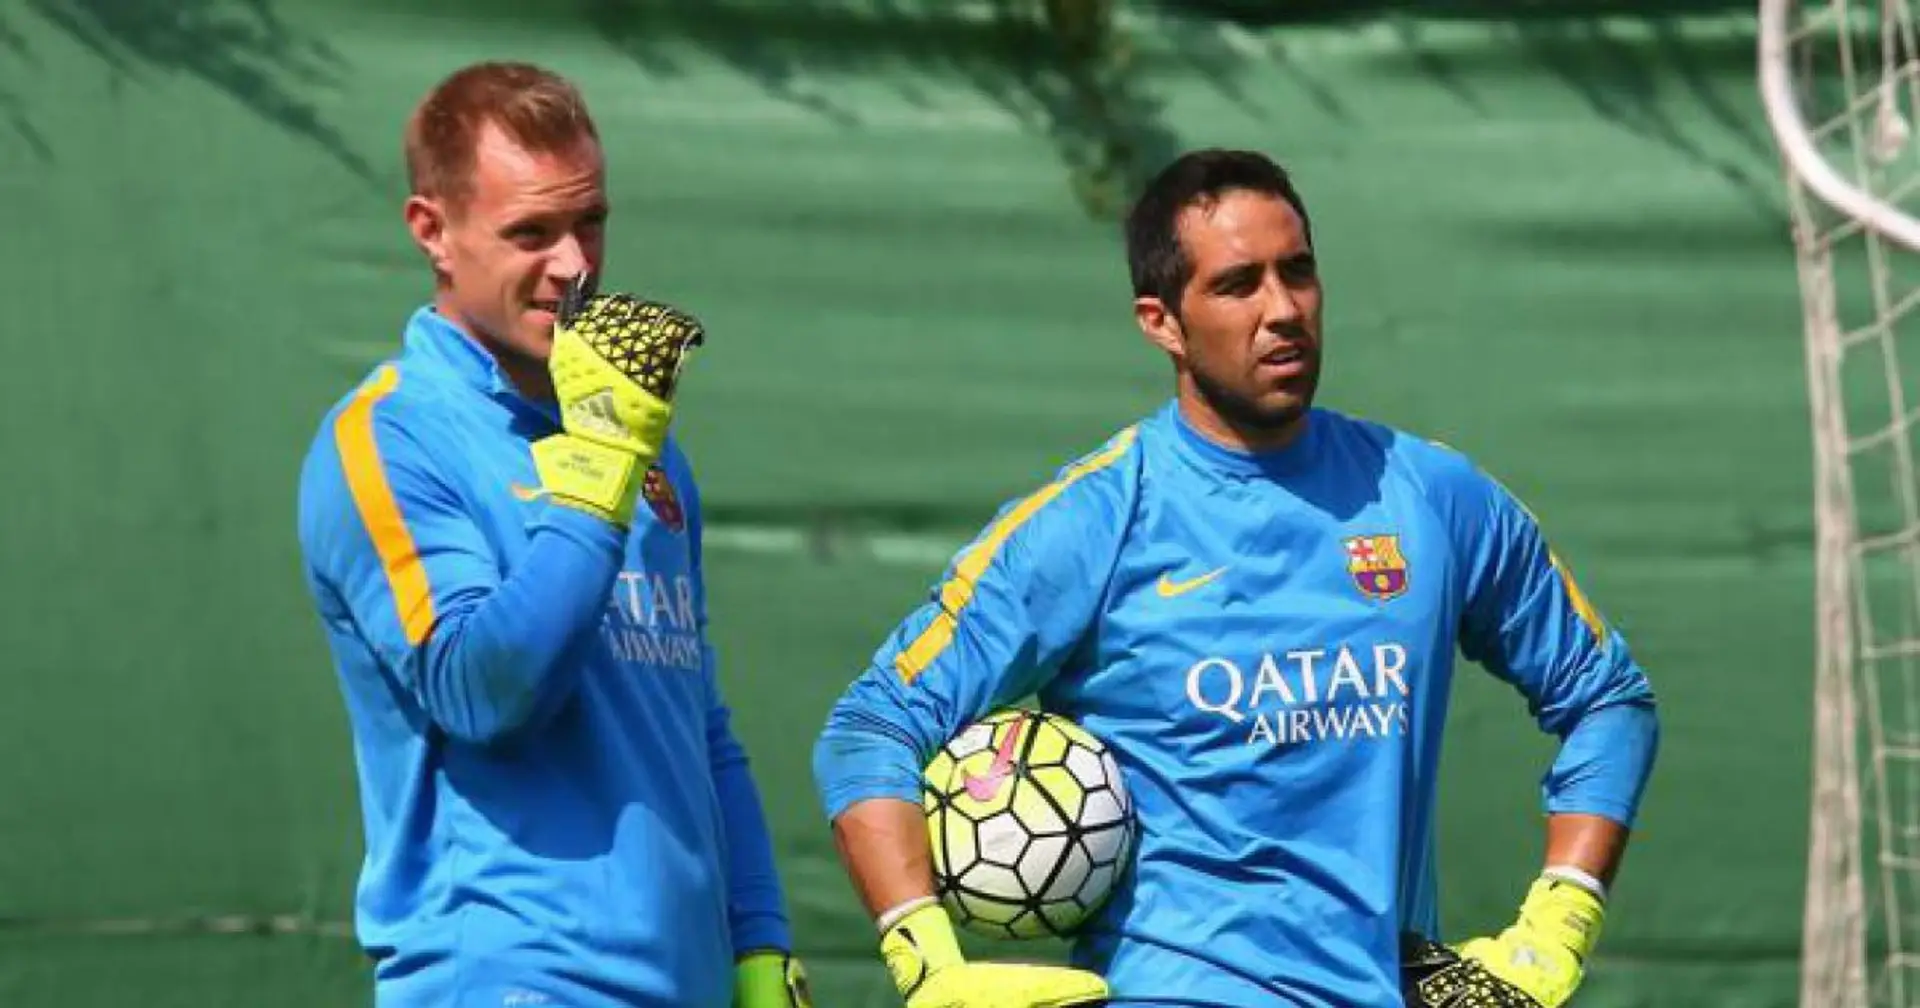 Ter Stegen to get closer to incredible record if he keeps clean sheet in El Clasico